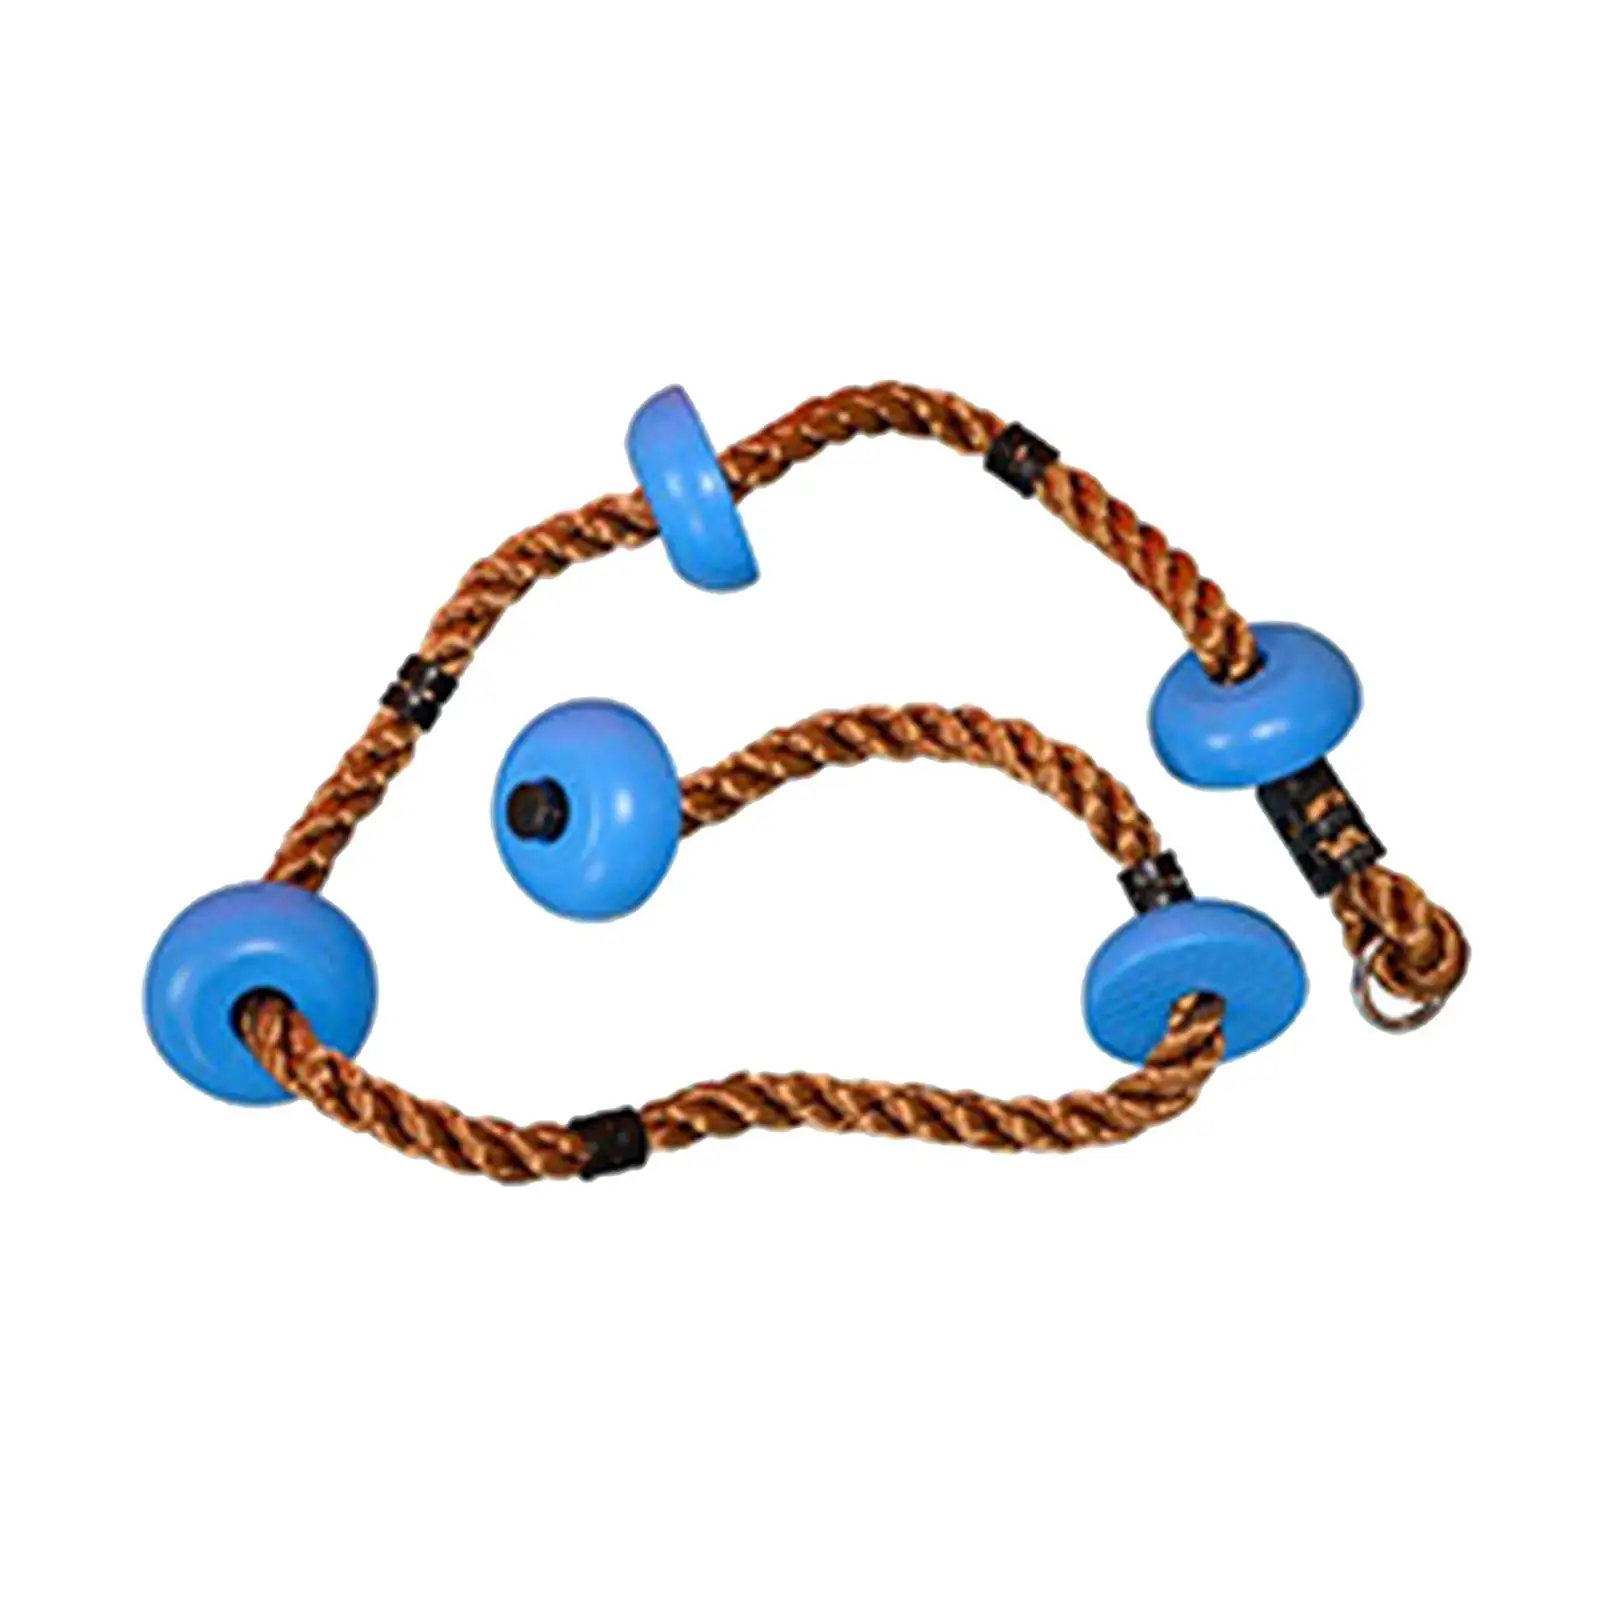 Climbing Rope Disc Accessory Equipment Set Props Games Sports Swing Ladder Swing for Playground Garden Exercise Boys Girls Kids